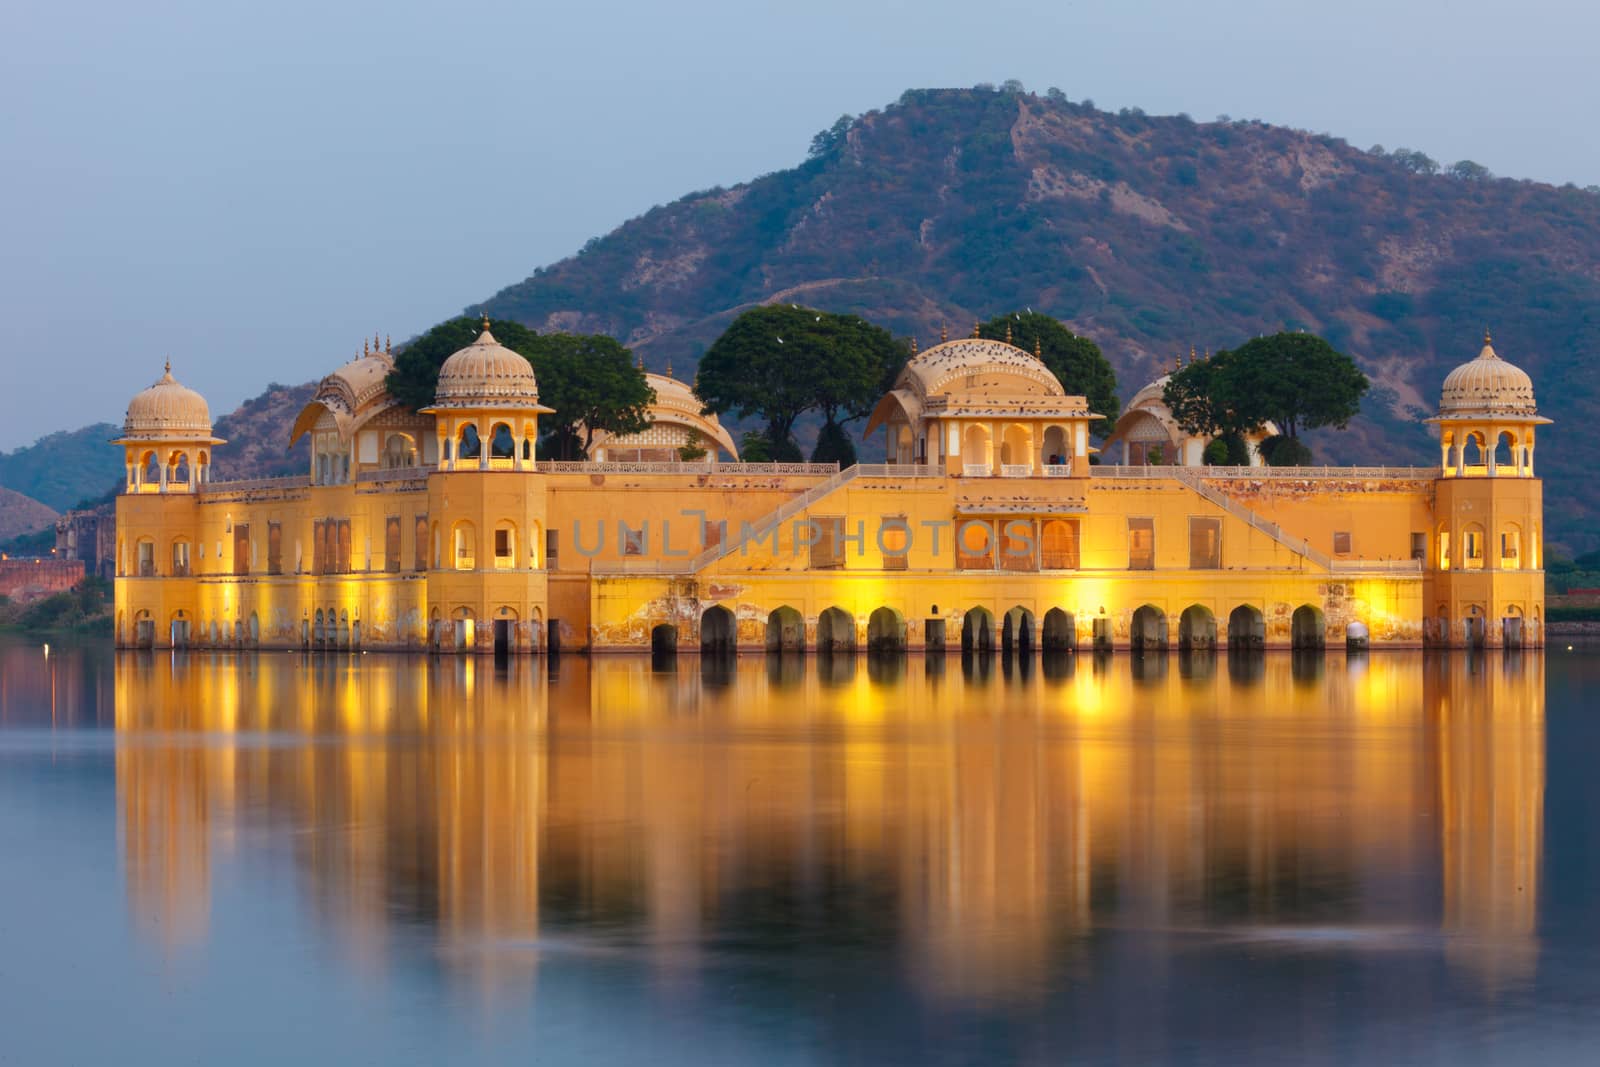 Jal Mahal Palace by ivz